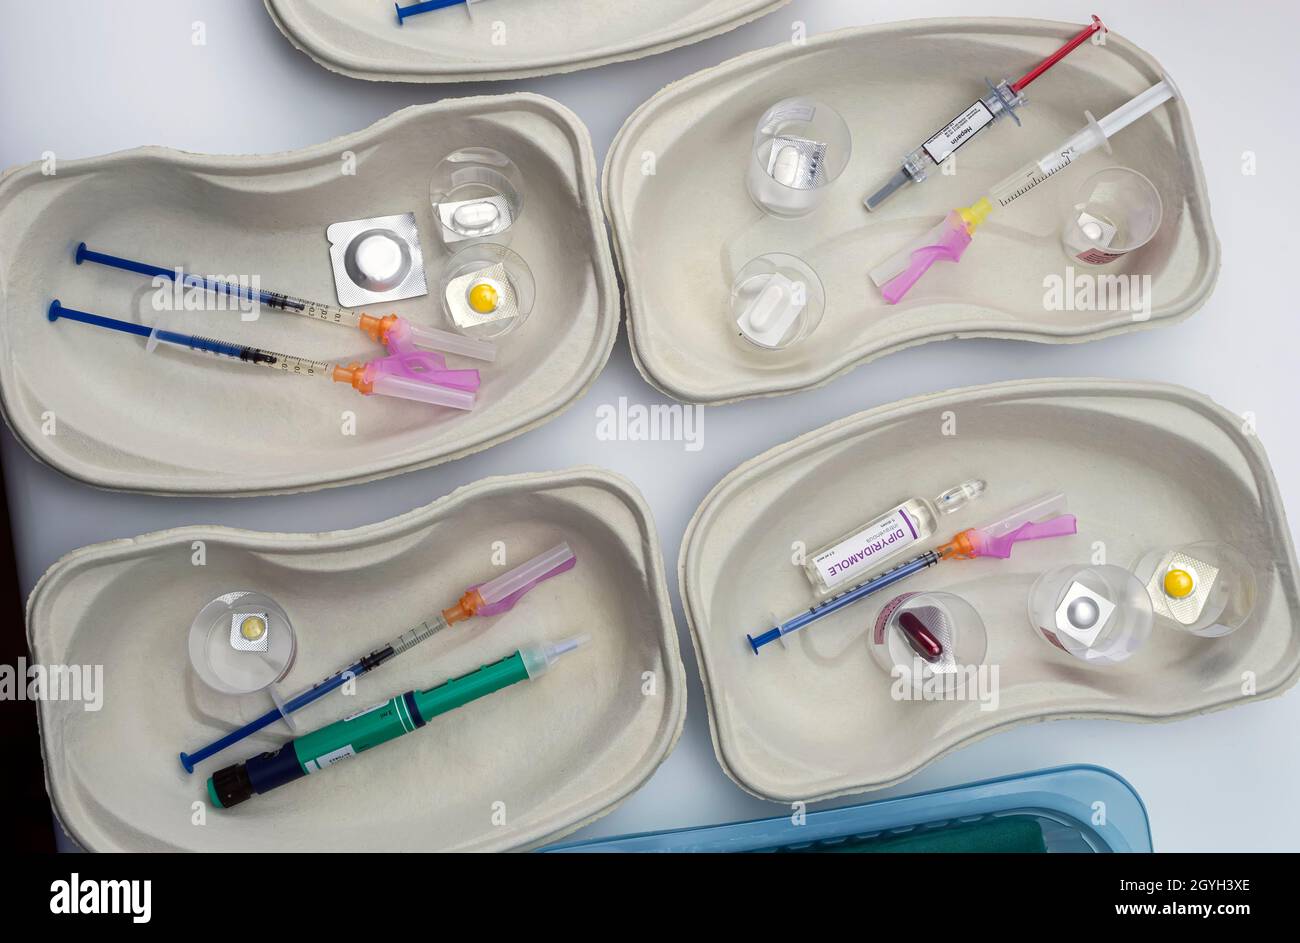 Diverse medication in glasses monodose along with insulin injectors in hospital, conceptual image Stock Photo